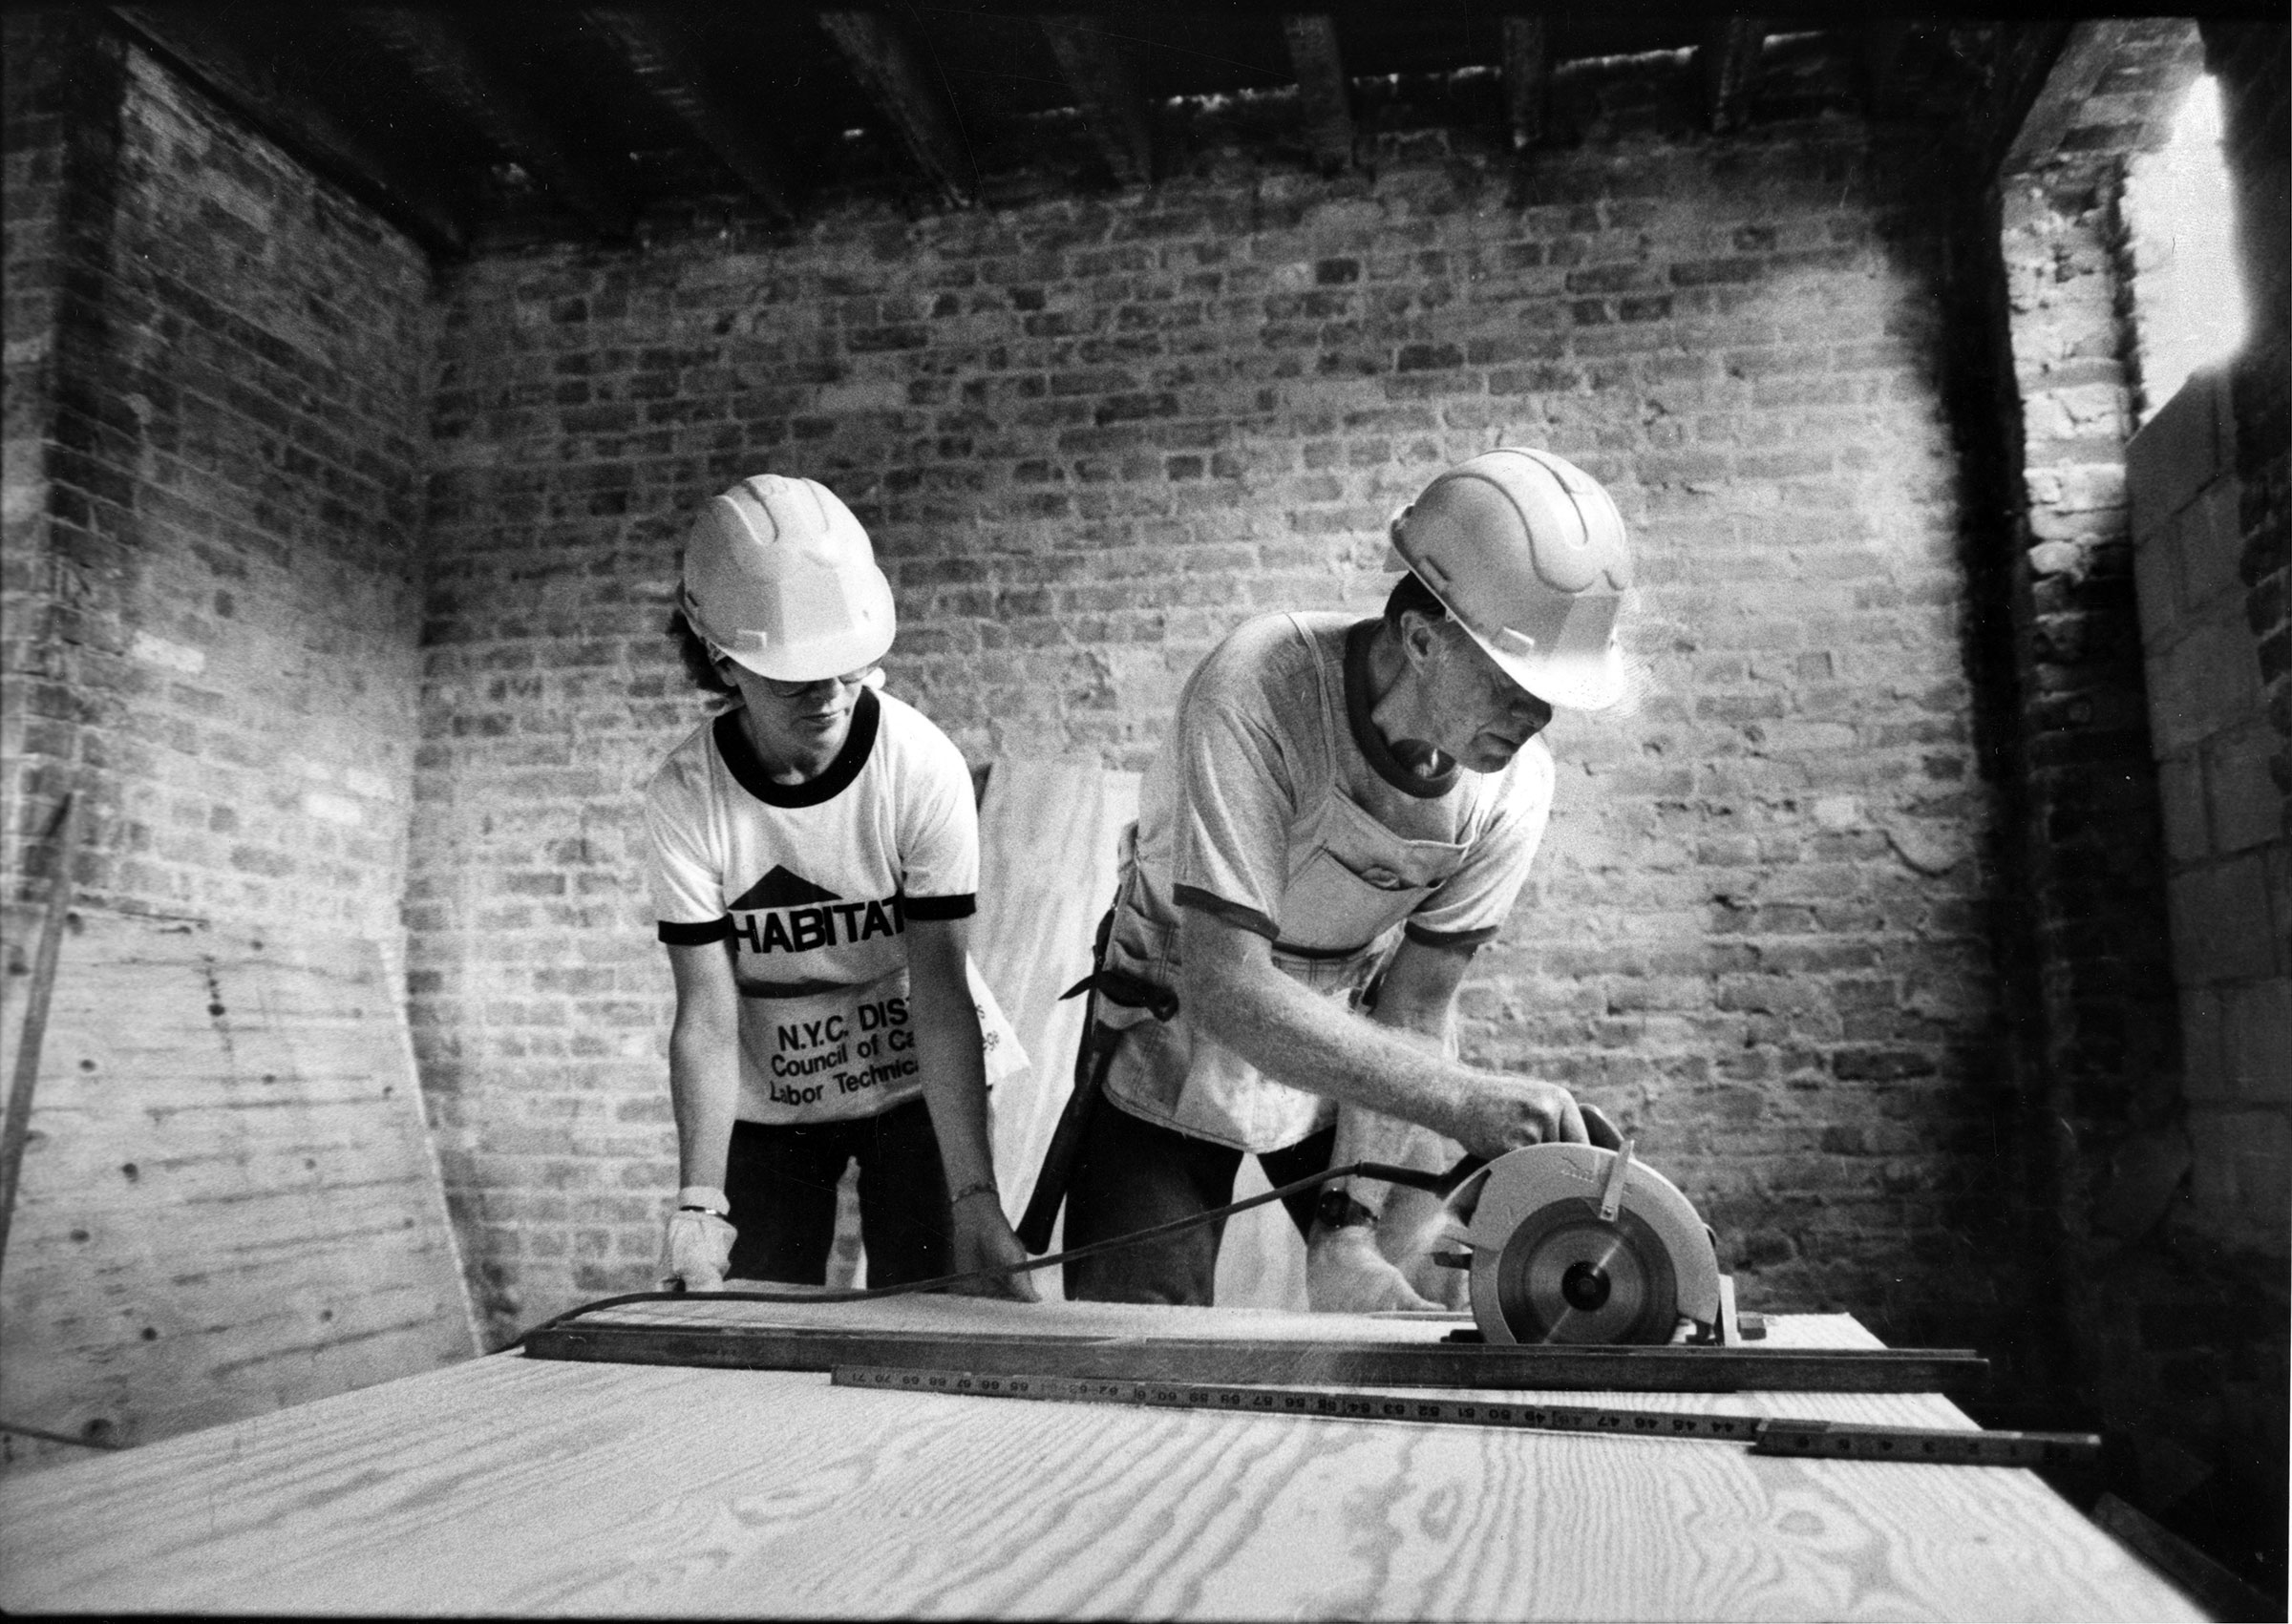 Jimmy and Rosalynn Carter working on a building renovation for Project Habitat for Humanity on the Lower East Side, NY in 1984.